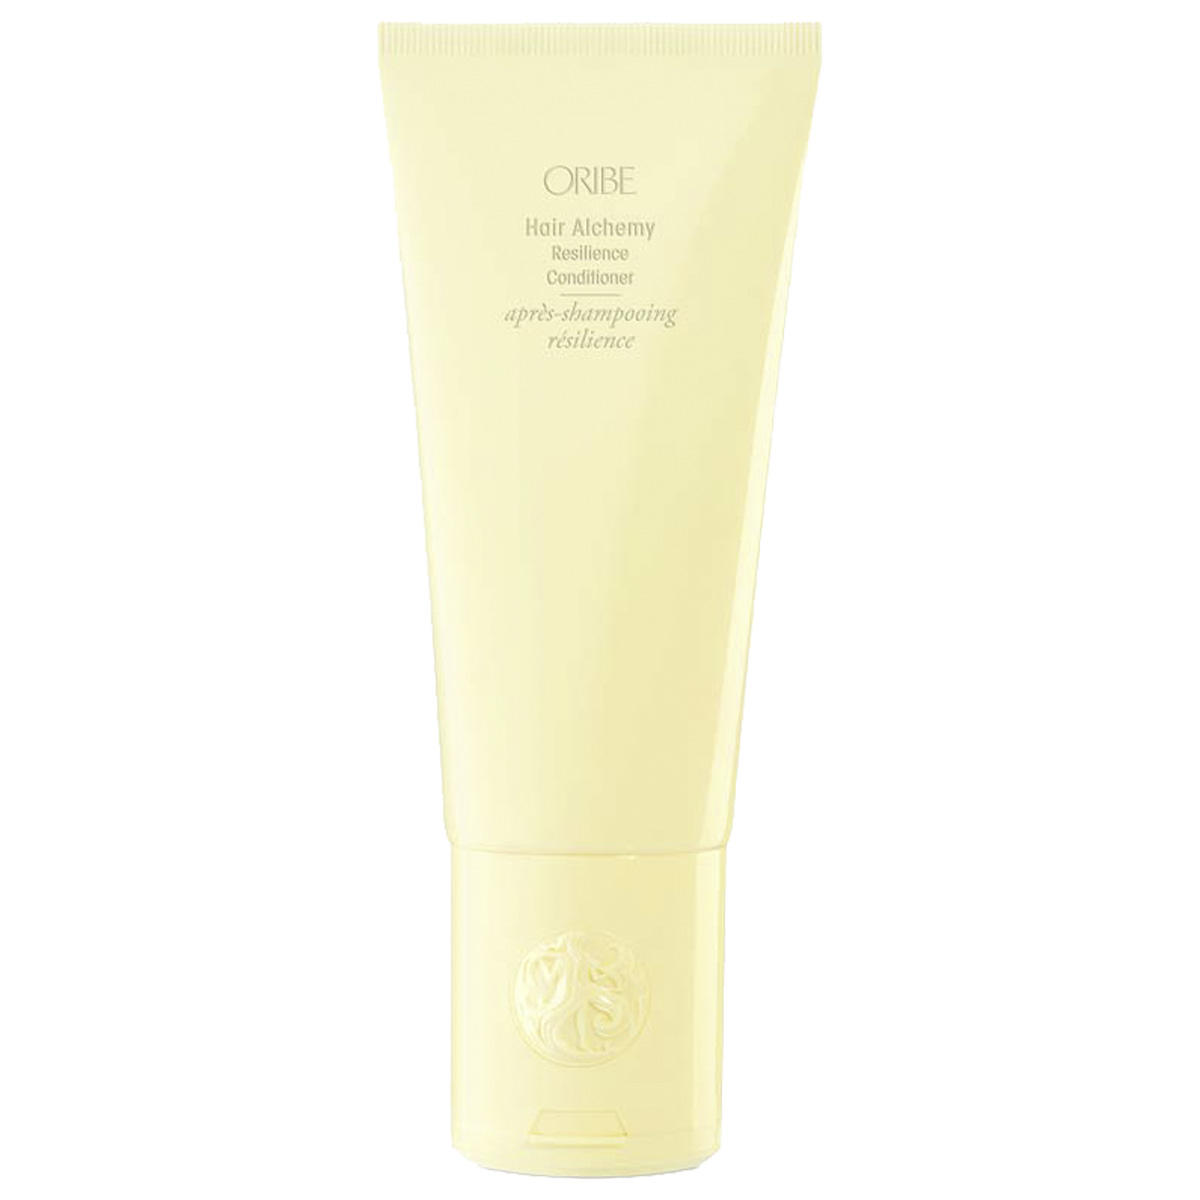 Oribe Hair Alchemy Resilience Conditioner 200 ml - 1